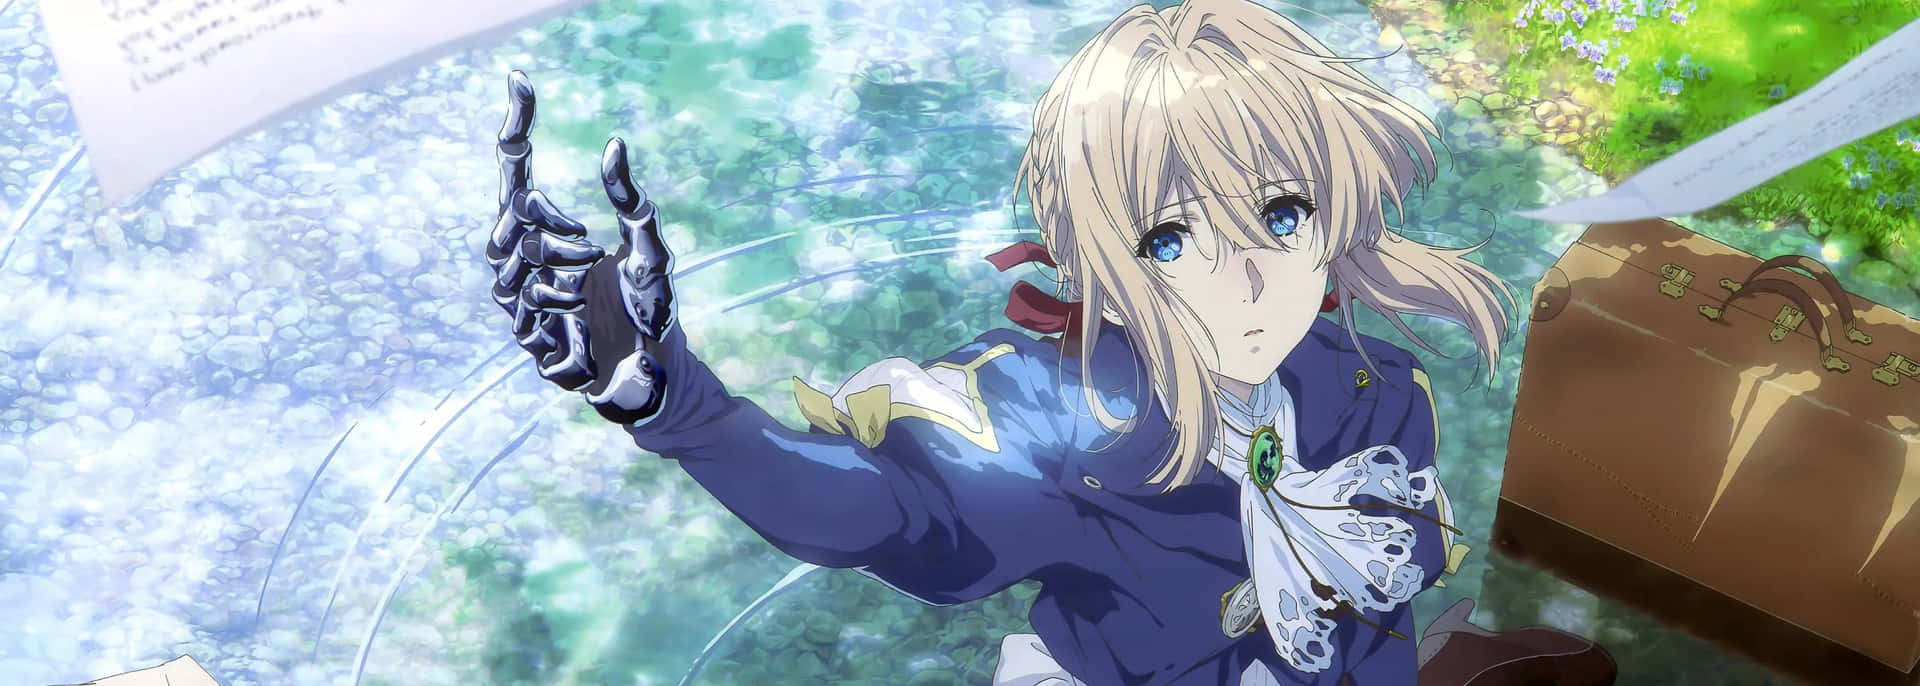 Immagineultrawide Di Violet Evergarden